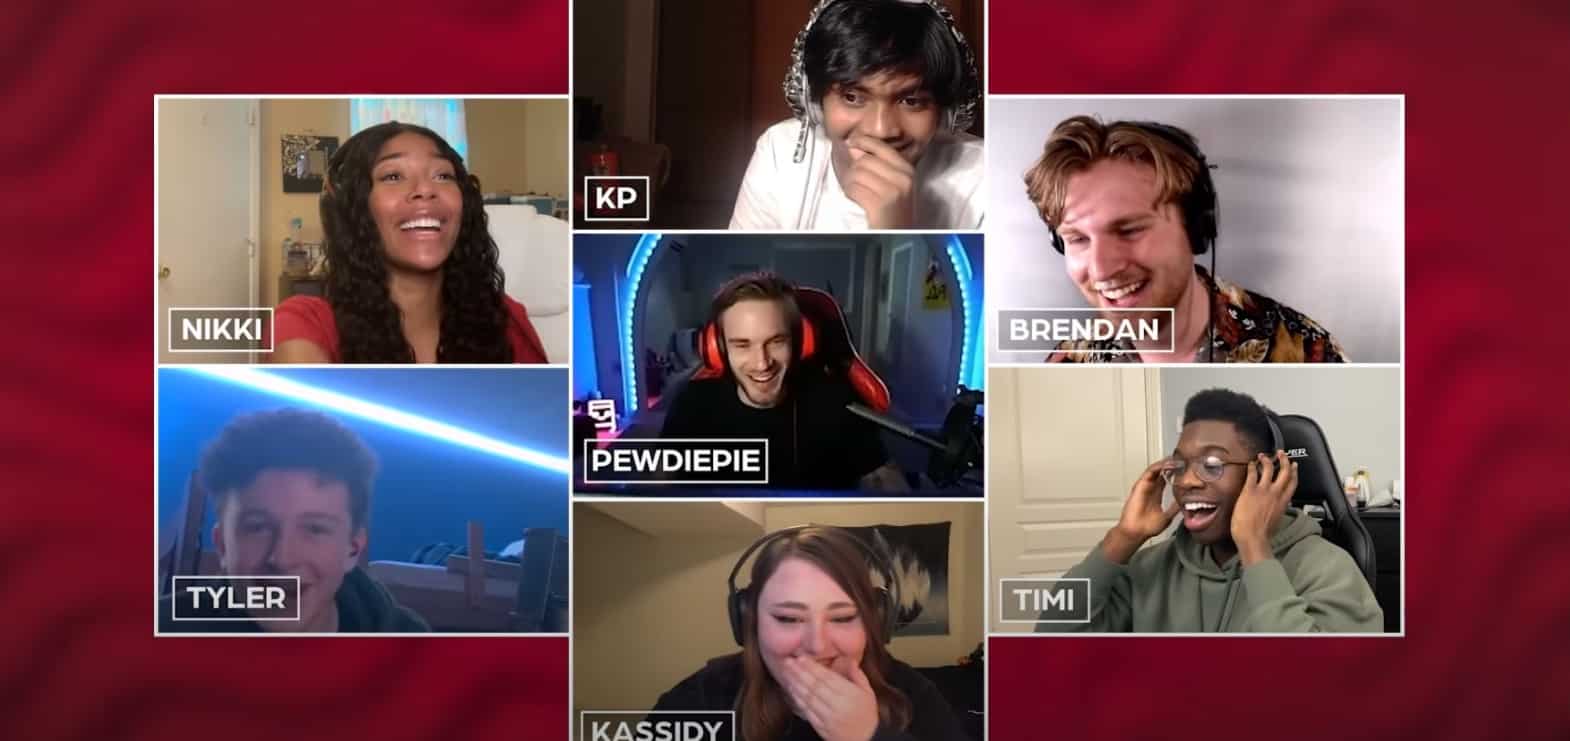 YouTuber PewDiePie plays Odd Man Out with fans